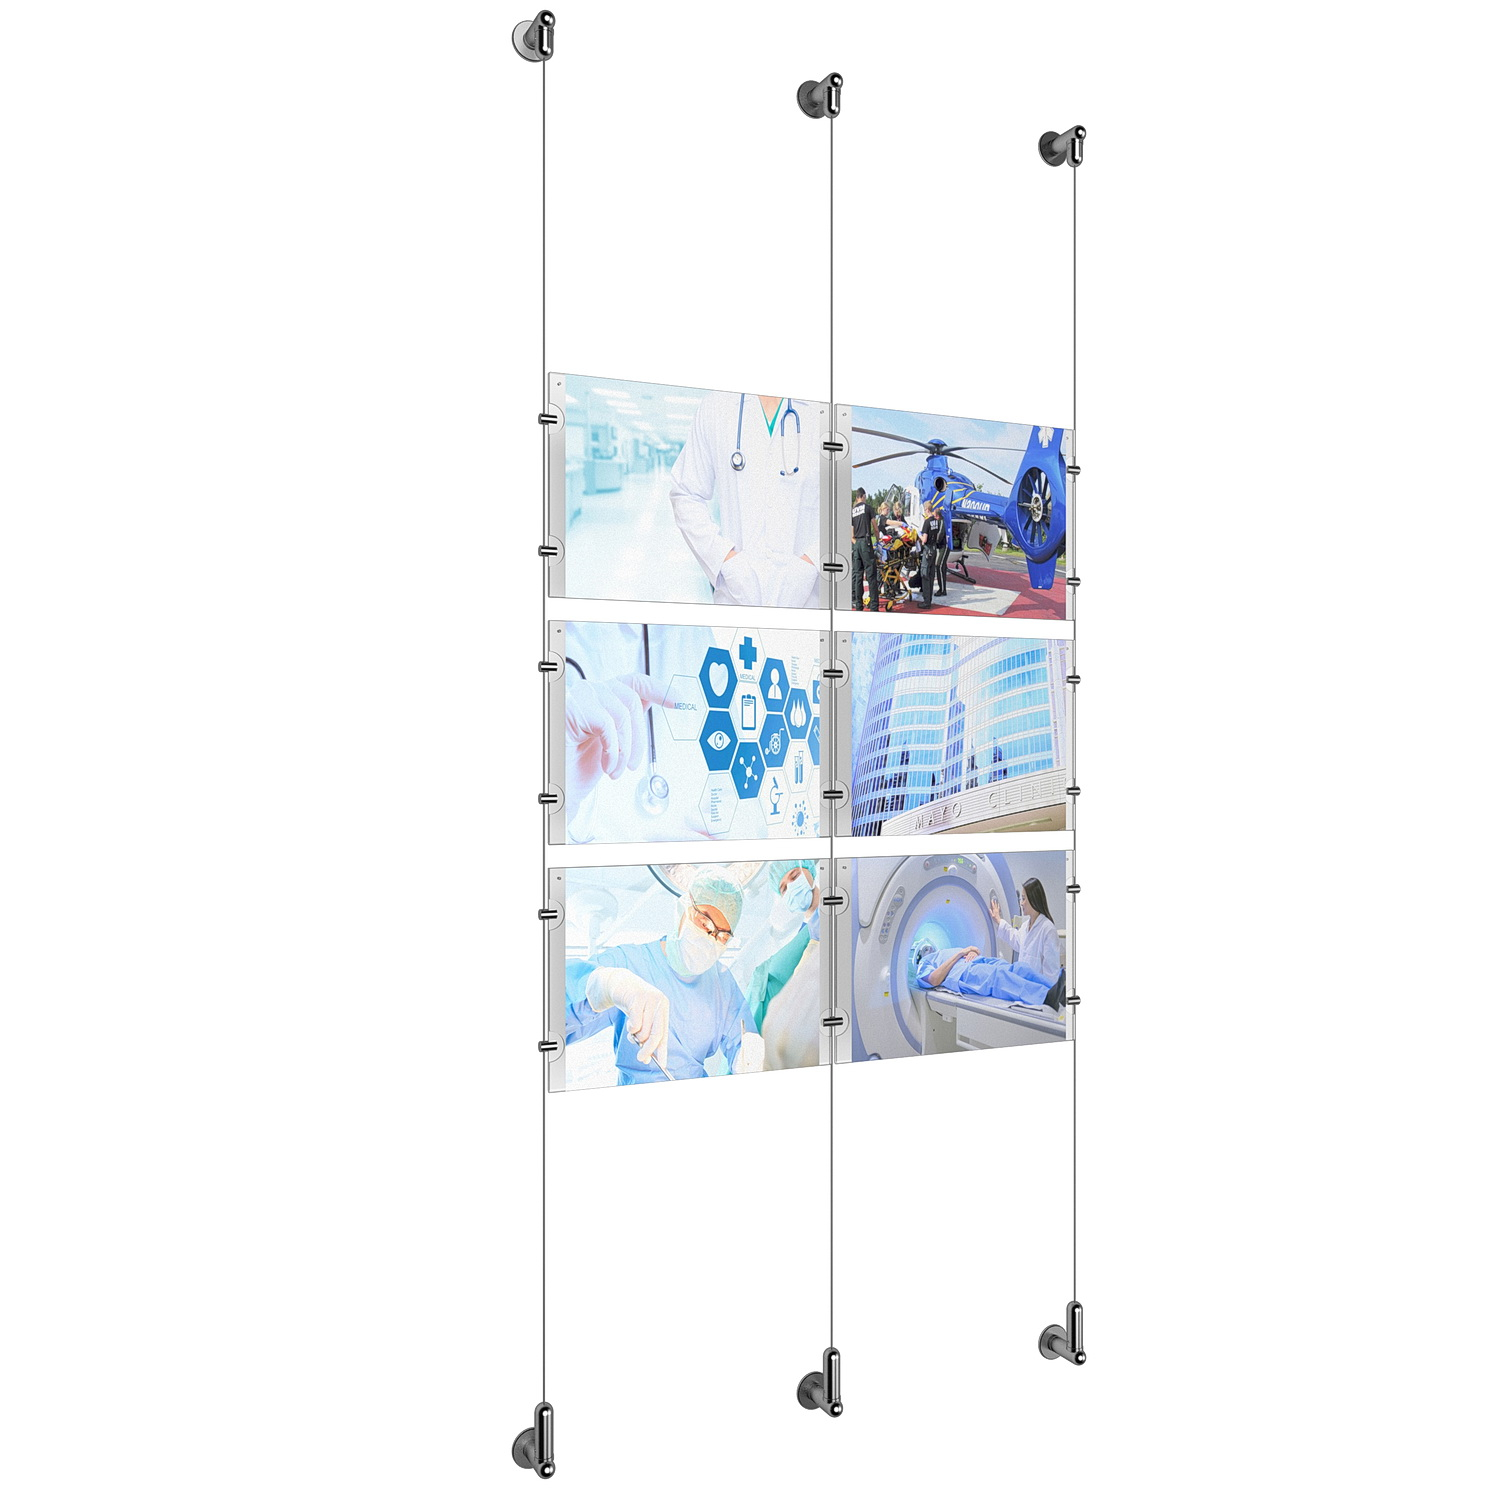 (6) 11'' Width x 8-1/2'' Height Clear Acrylic Frame & (3) Wall-to-Wall Aluminum Clear Anodized Cable Systems with (12) Single-Sided Panel Grippers (6) Double-Sided Panel Grippers